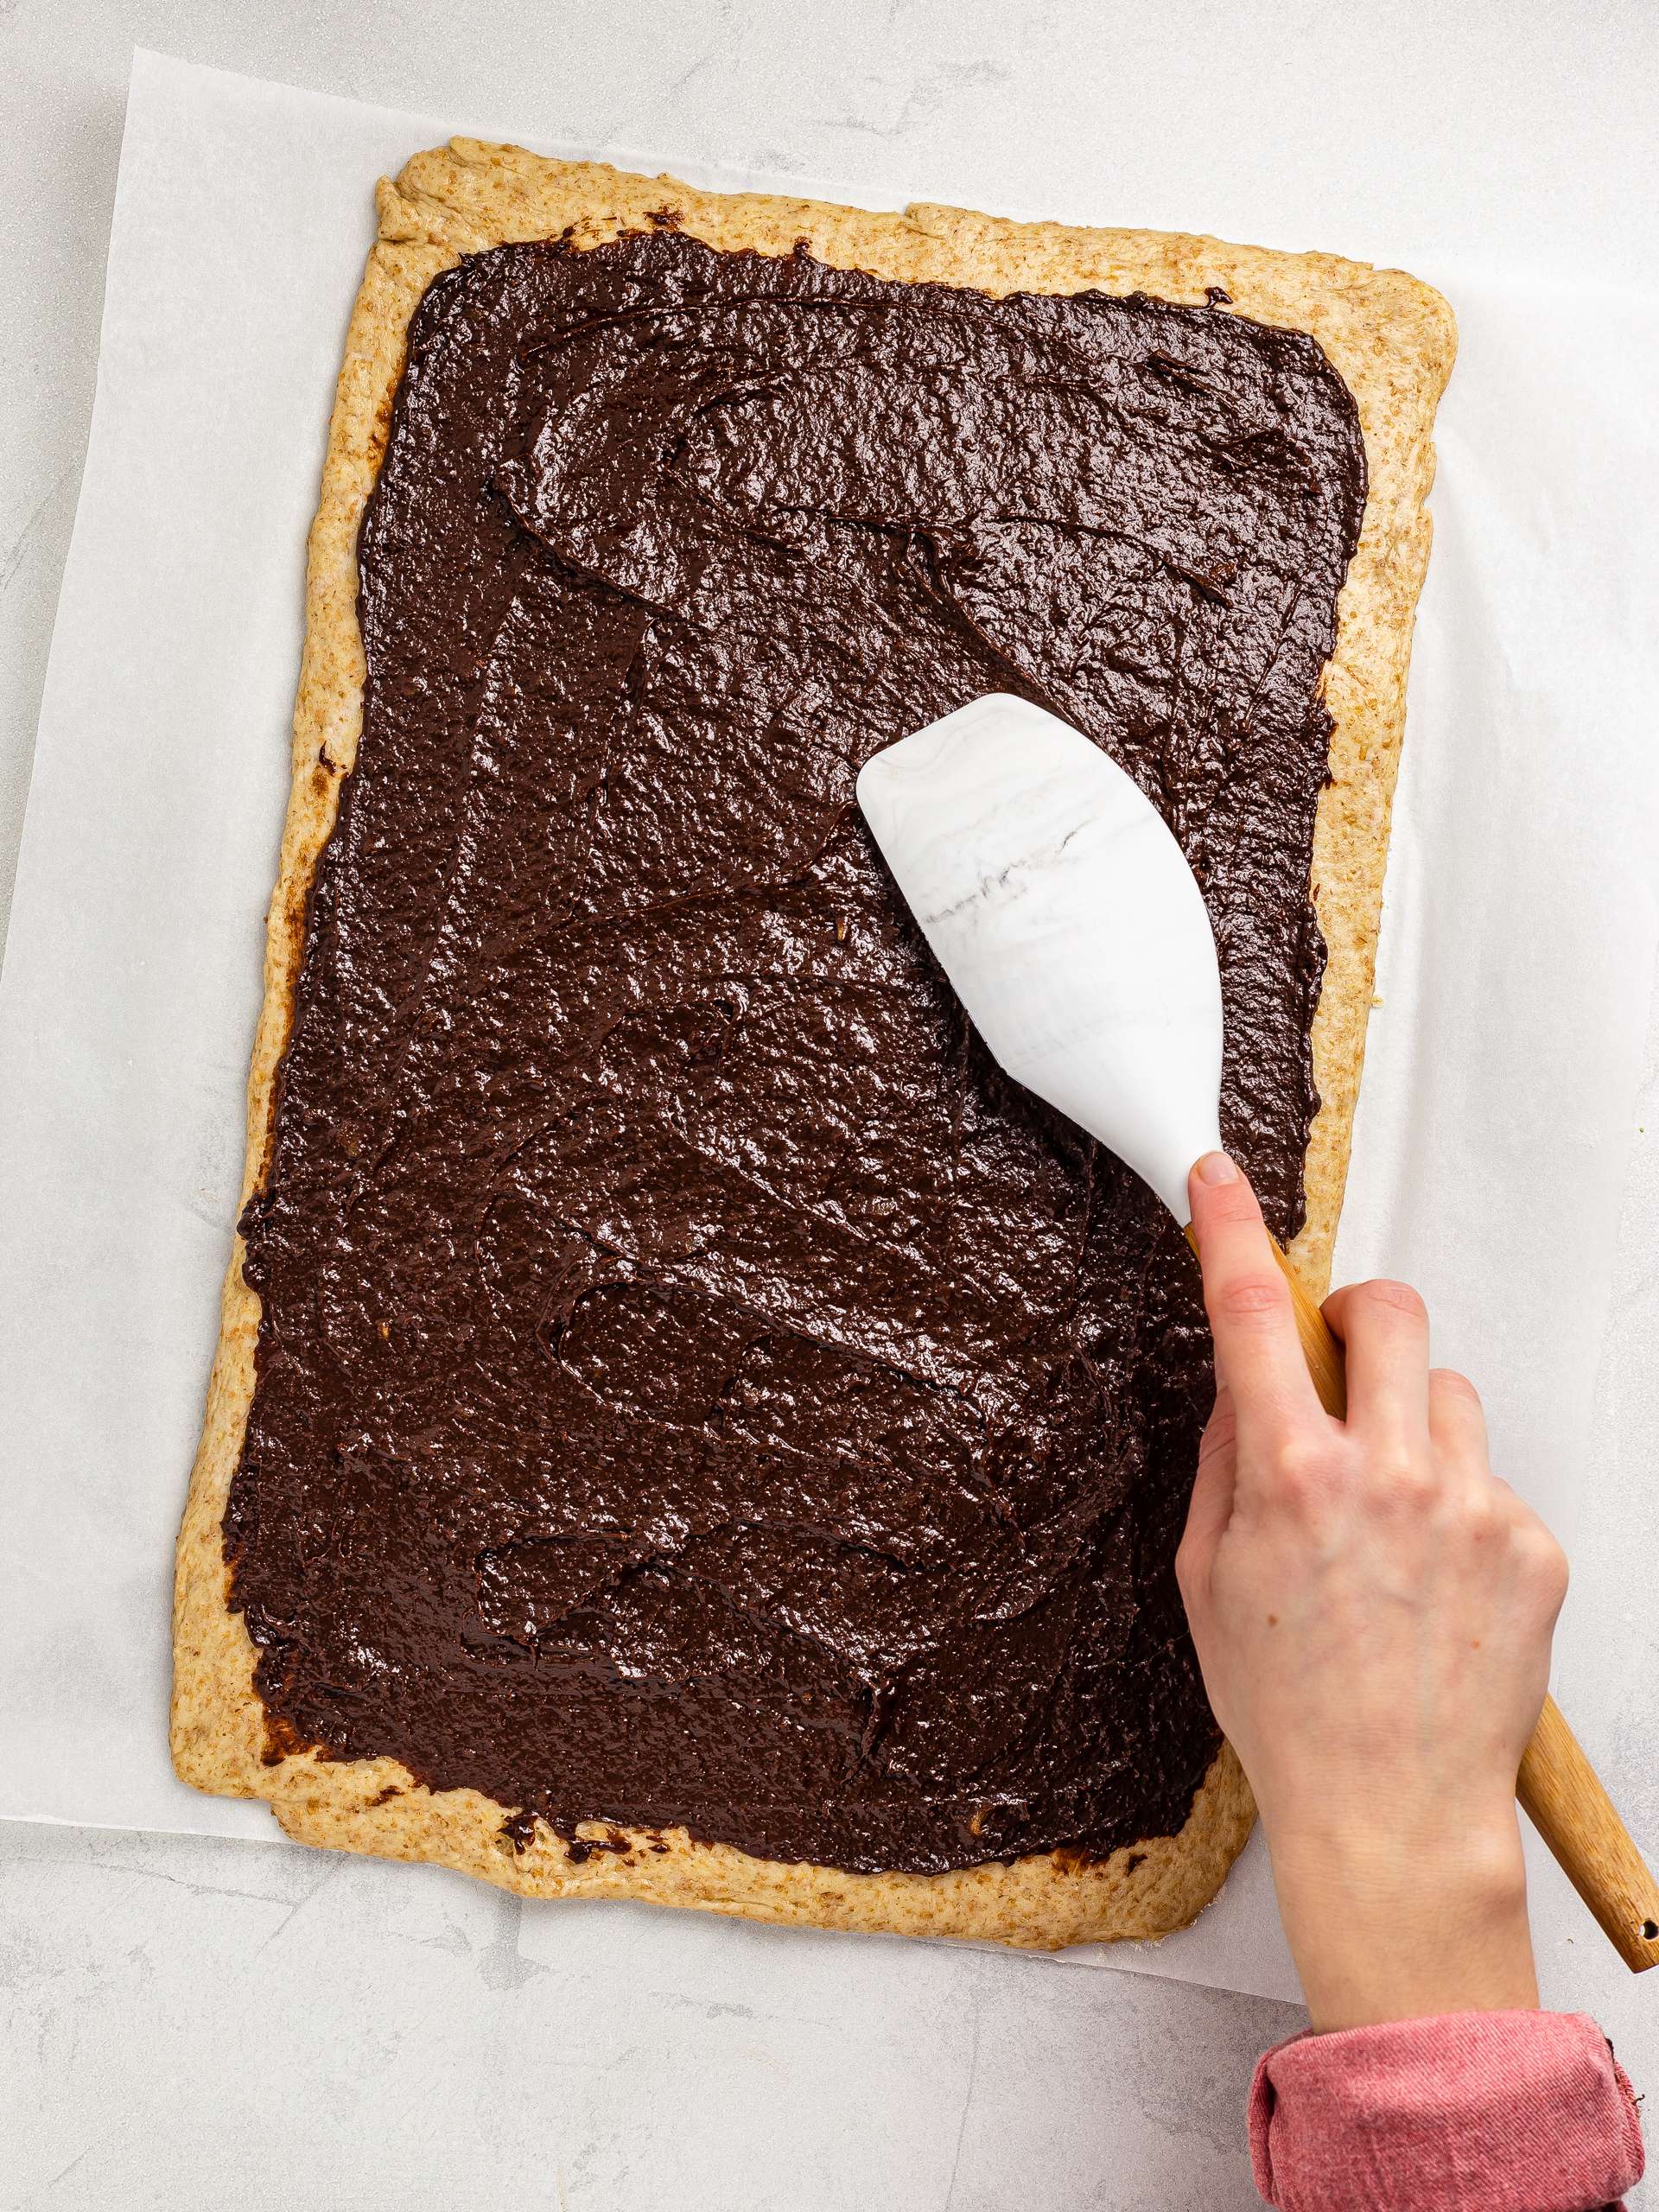 chocolate date filling spread over the dough base